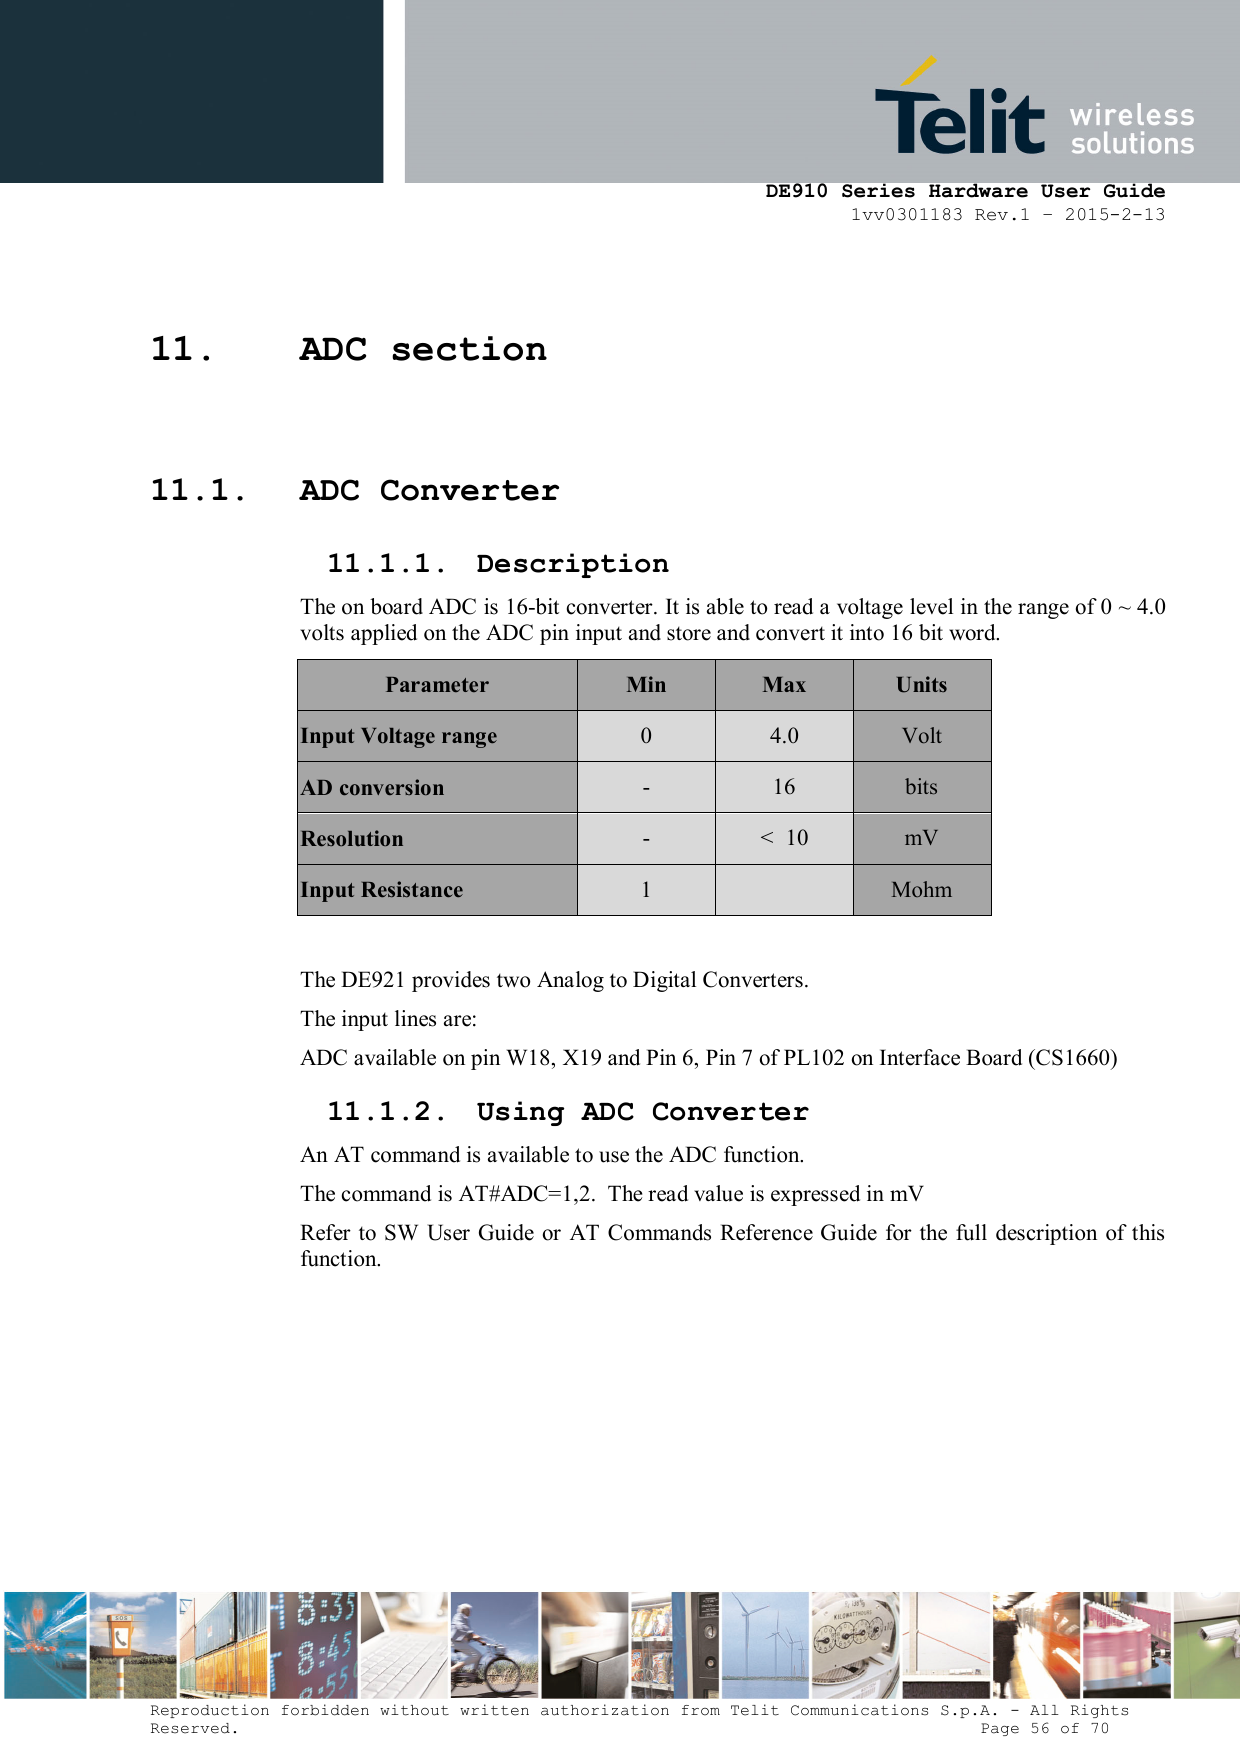      DE910 Series Hardware User Guide 1vv0301183 Rev.1 – 2015-2-13 Reproduction forbidden without written authorization from Telit Communications S.p.A. - All Rights Reserved.                                                                          Page 56 of 70 11. ADC section 11.1. ADC Converter 11.1.1. Description The on board ADC is 16-bit converter. It is able to read a voltage level in the range of 0 ~ 4.0 volts applied on the ADC pin input and store and convert it into 16 bit word. Parameter  Min  Max  Units Input Voltage range  0  4.0  Volt AD conversion  -  16  bits Resolution  -  &lt;  10  mV Input Resistance  1    Mohm  The DE921 provides two Analog to Digital Converters.  The input lines are: ADC available on pin W18, X19 and Pin 6, Pin 7 of PL102 on Interface Board (CS1660) 11.1.2. Using ADC Converter An AT command is available to use the ADC function.  The command is AT#ADC=1,2.  The read value is expressed in mV Refer to SW User Guide  or  AT Commands Reference  Guide  for the full description of this function. 